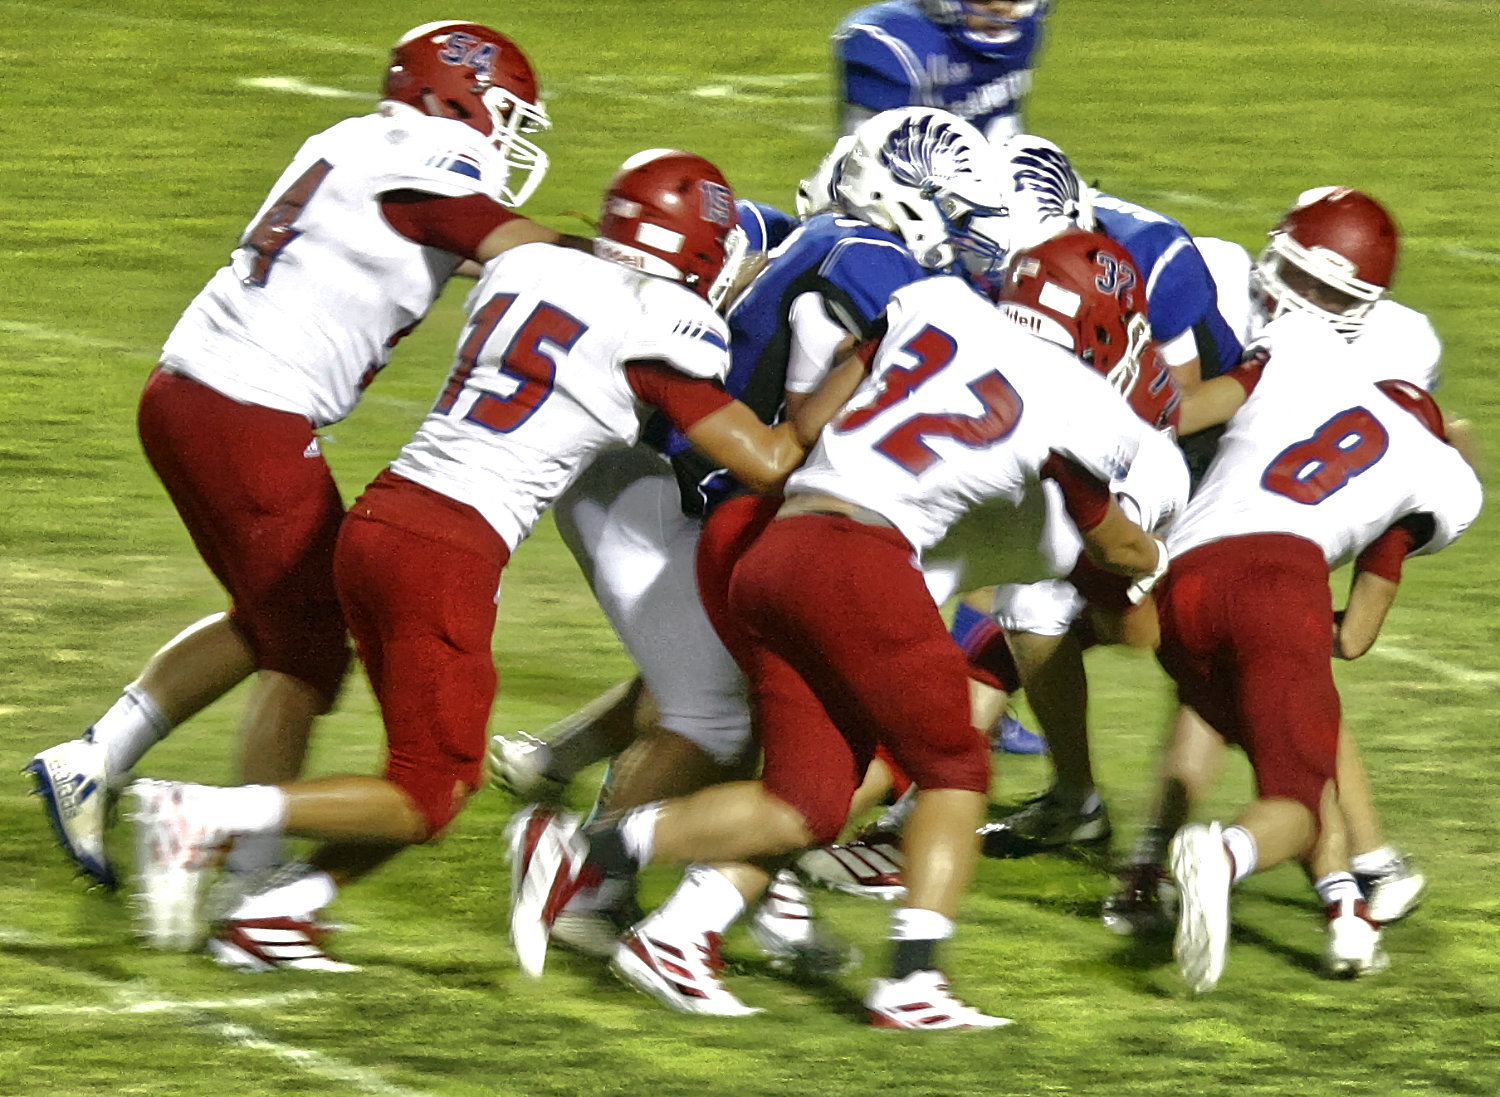 The Panthers defense played stellar football in the opening season win against Hawkins.